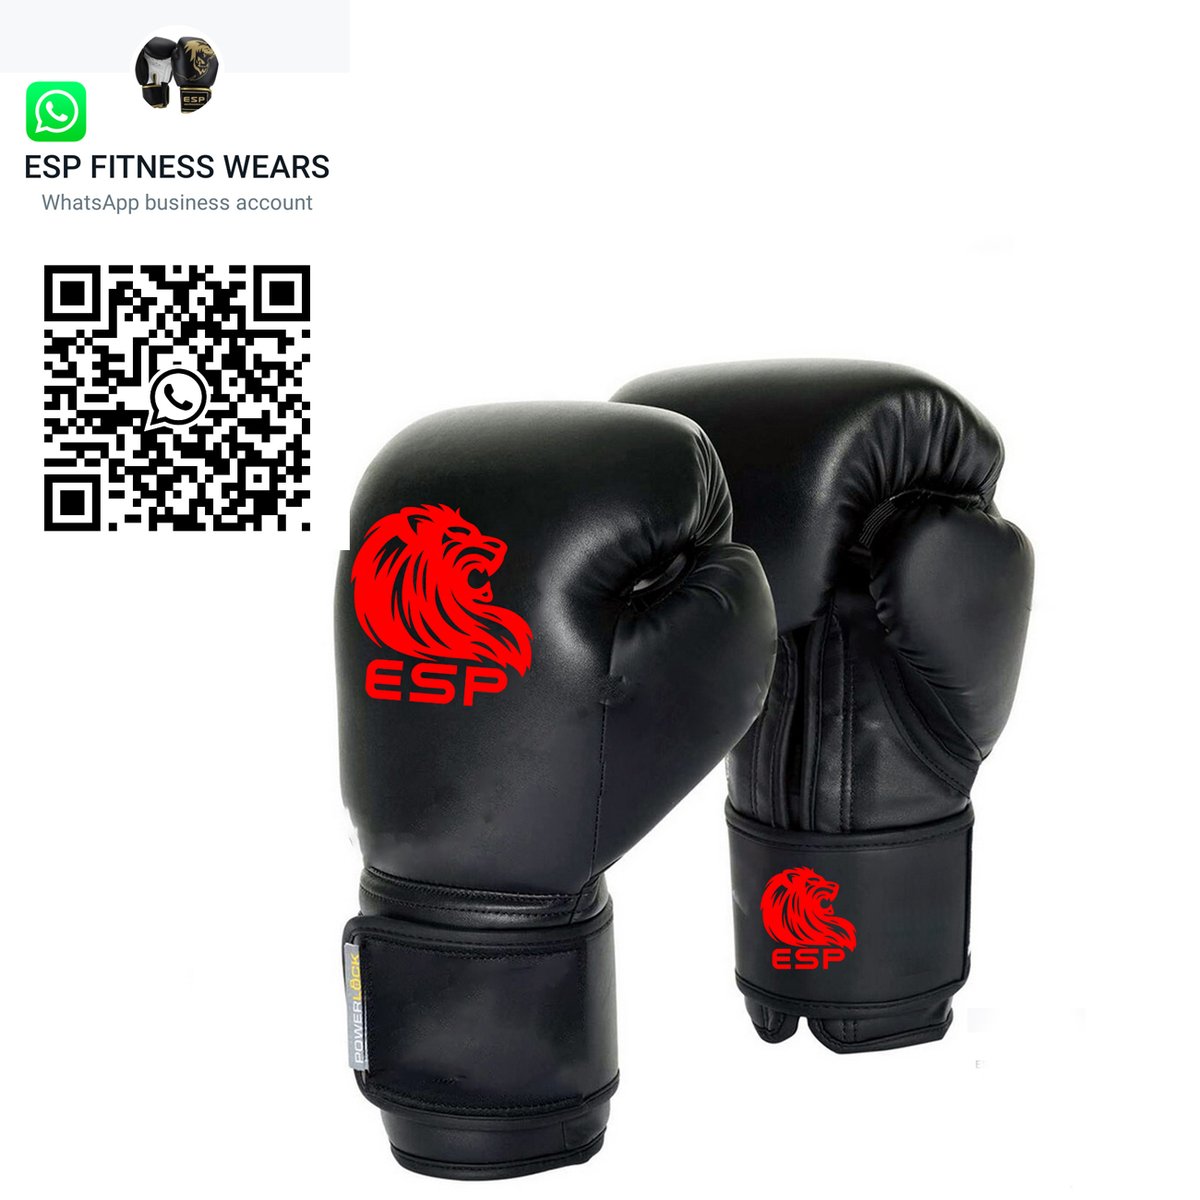 boxing  wears by ESP- Fitness-Wears
boxing gowns with high quality and different colors and unique designs with reasonable prices
#WhatsAppNumber #+923314480783
#amsterdamboxing #californiaboxing #kidsboxing
#sydneyboxing #ohioboxing #sanjoseboxing #baltimoreboxing #boxingworld